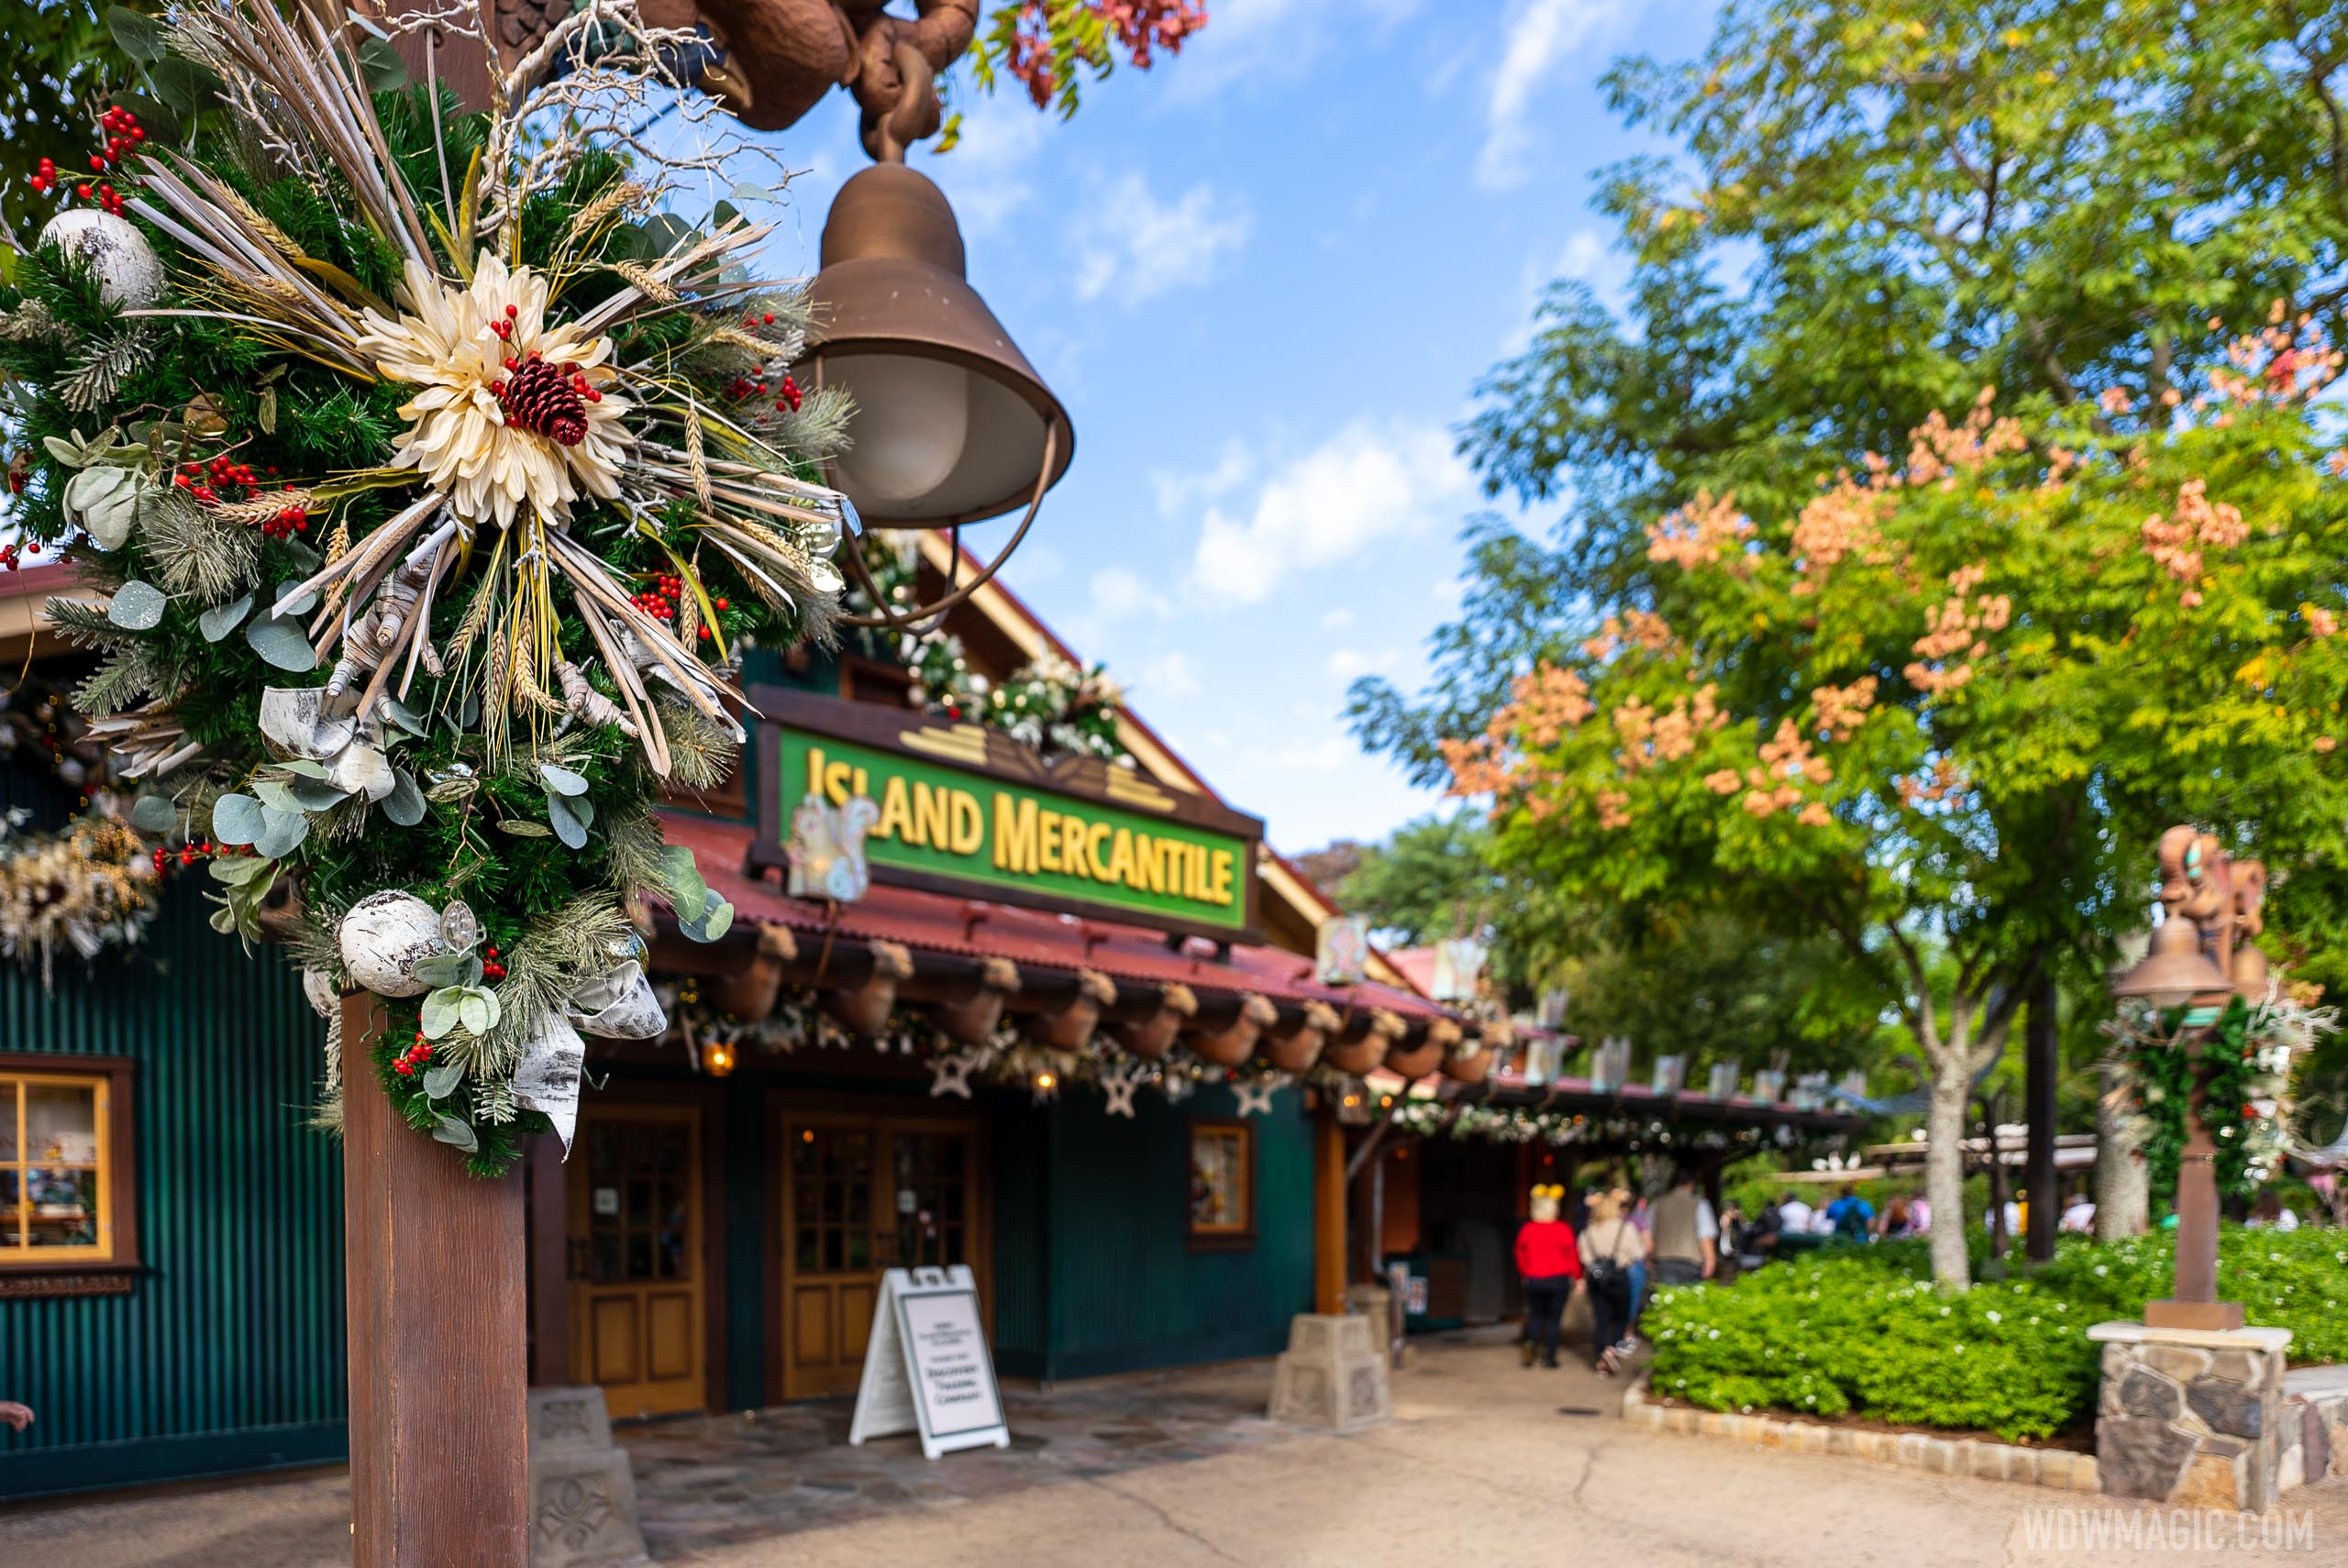 Disney’s Animal Kingdom is now decorated for the holidays